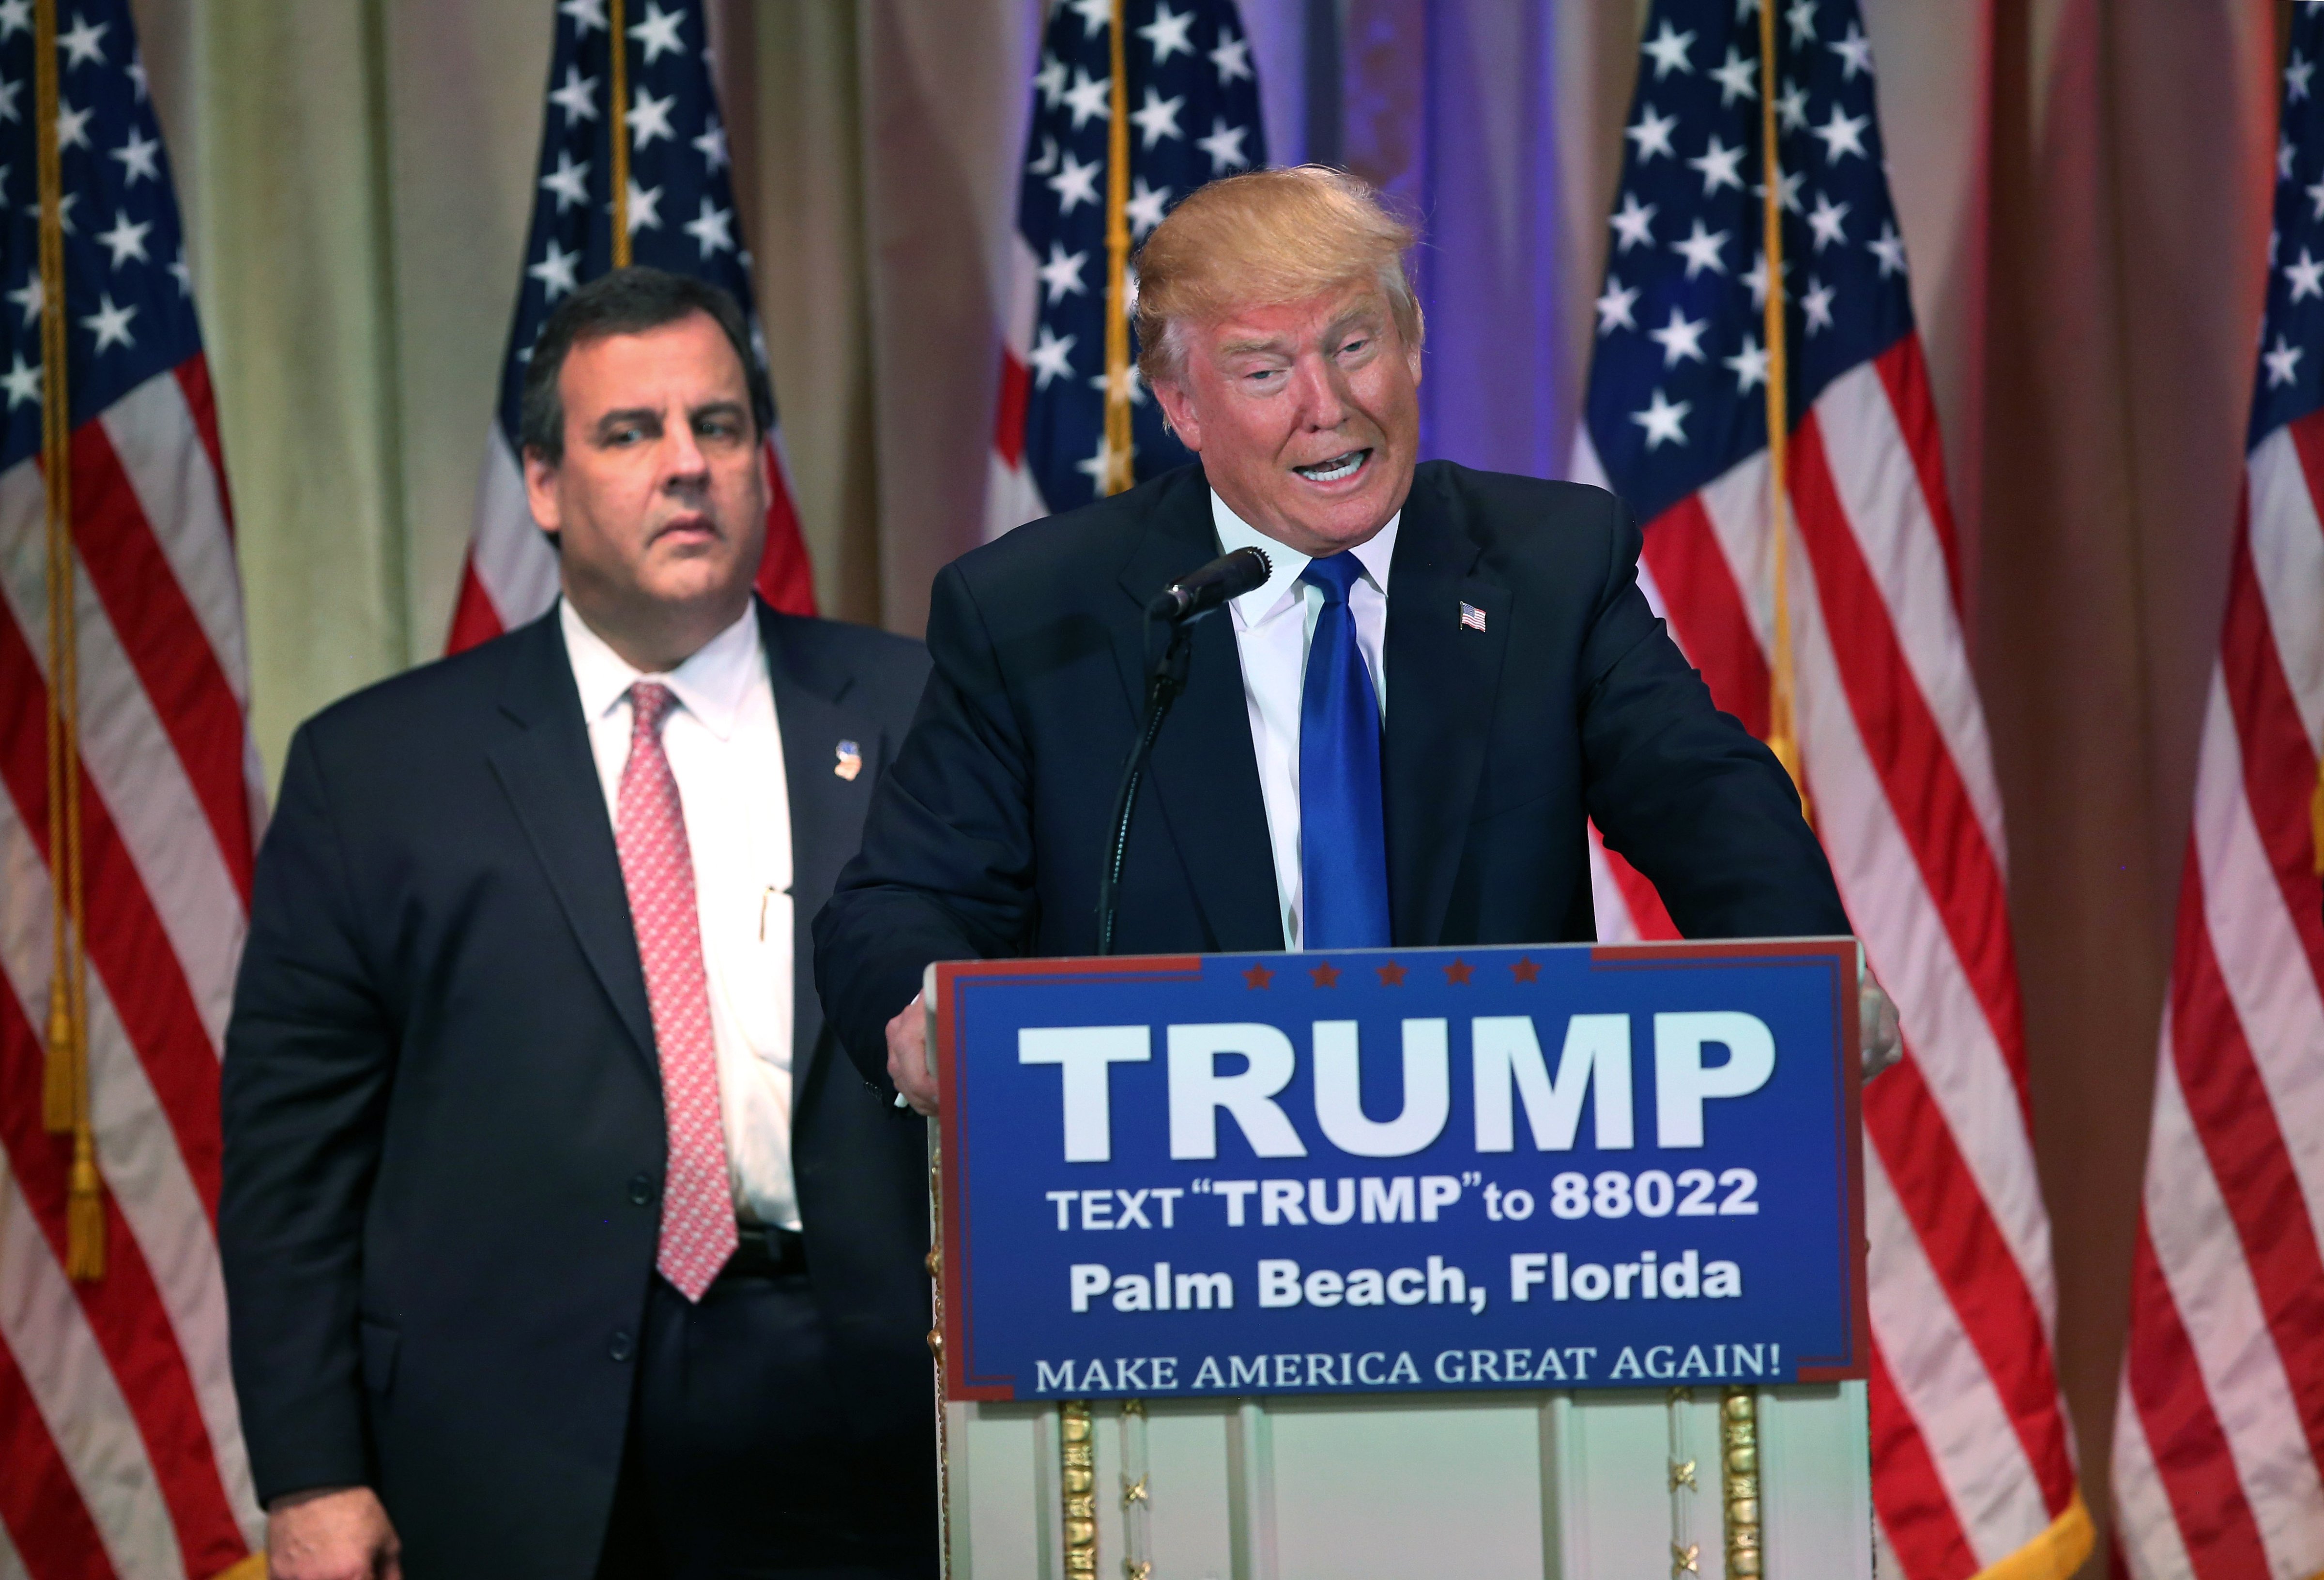 Chris Christie accompanies Donald Trump at a press conference on March 1, 2016 in Palm Beach, Fla. (John Moore—Getty Images)